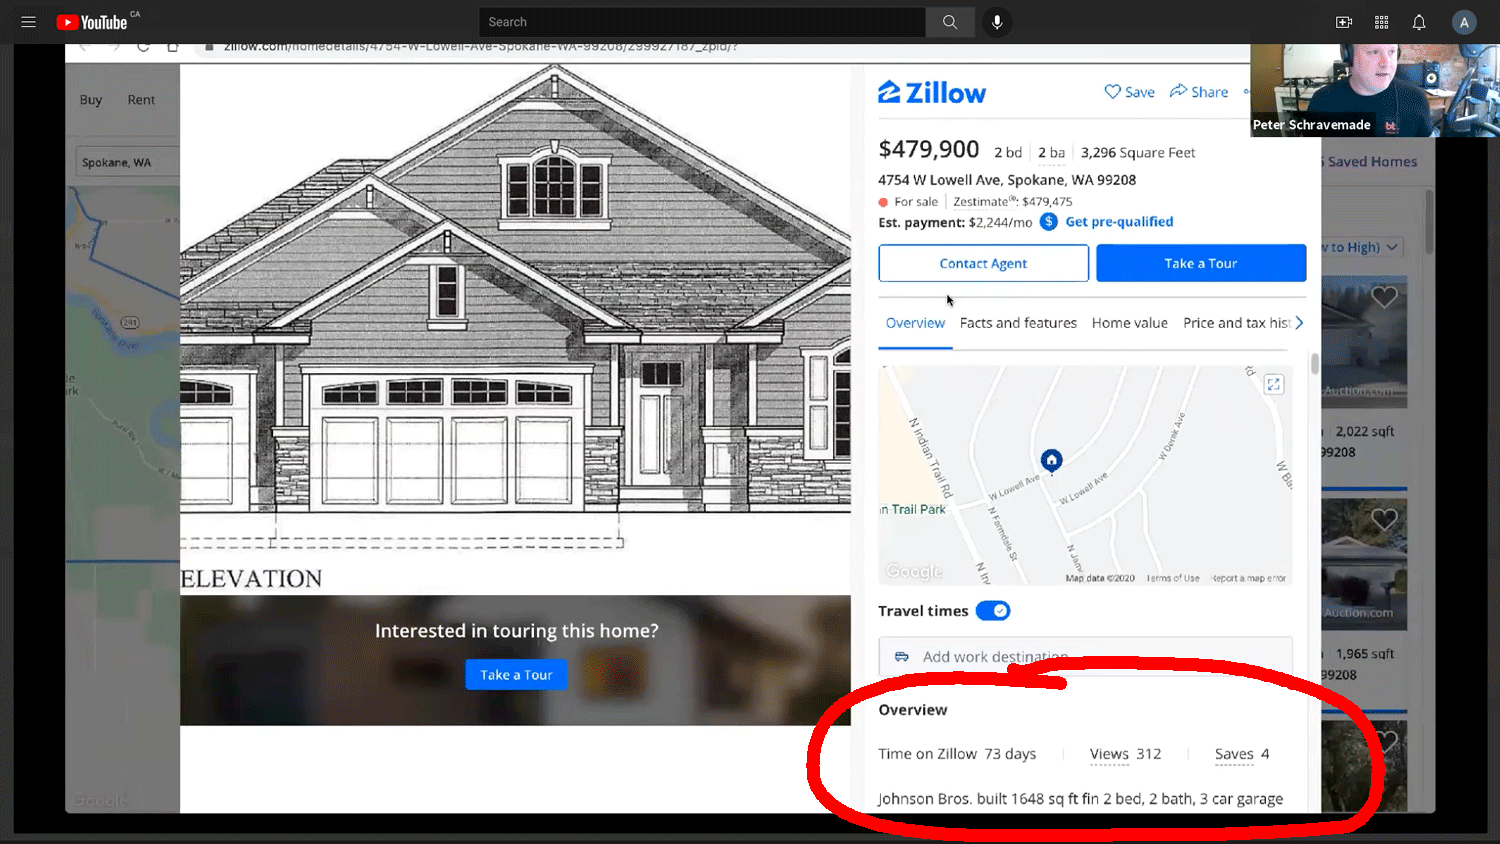 It pays to monitor your listing on Zillow